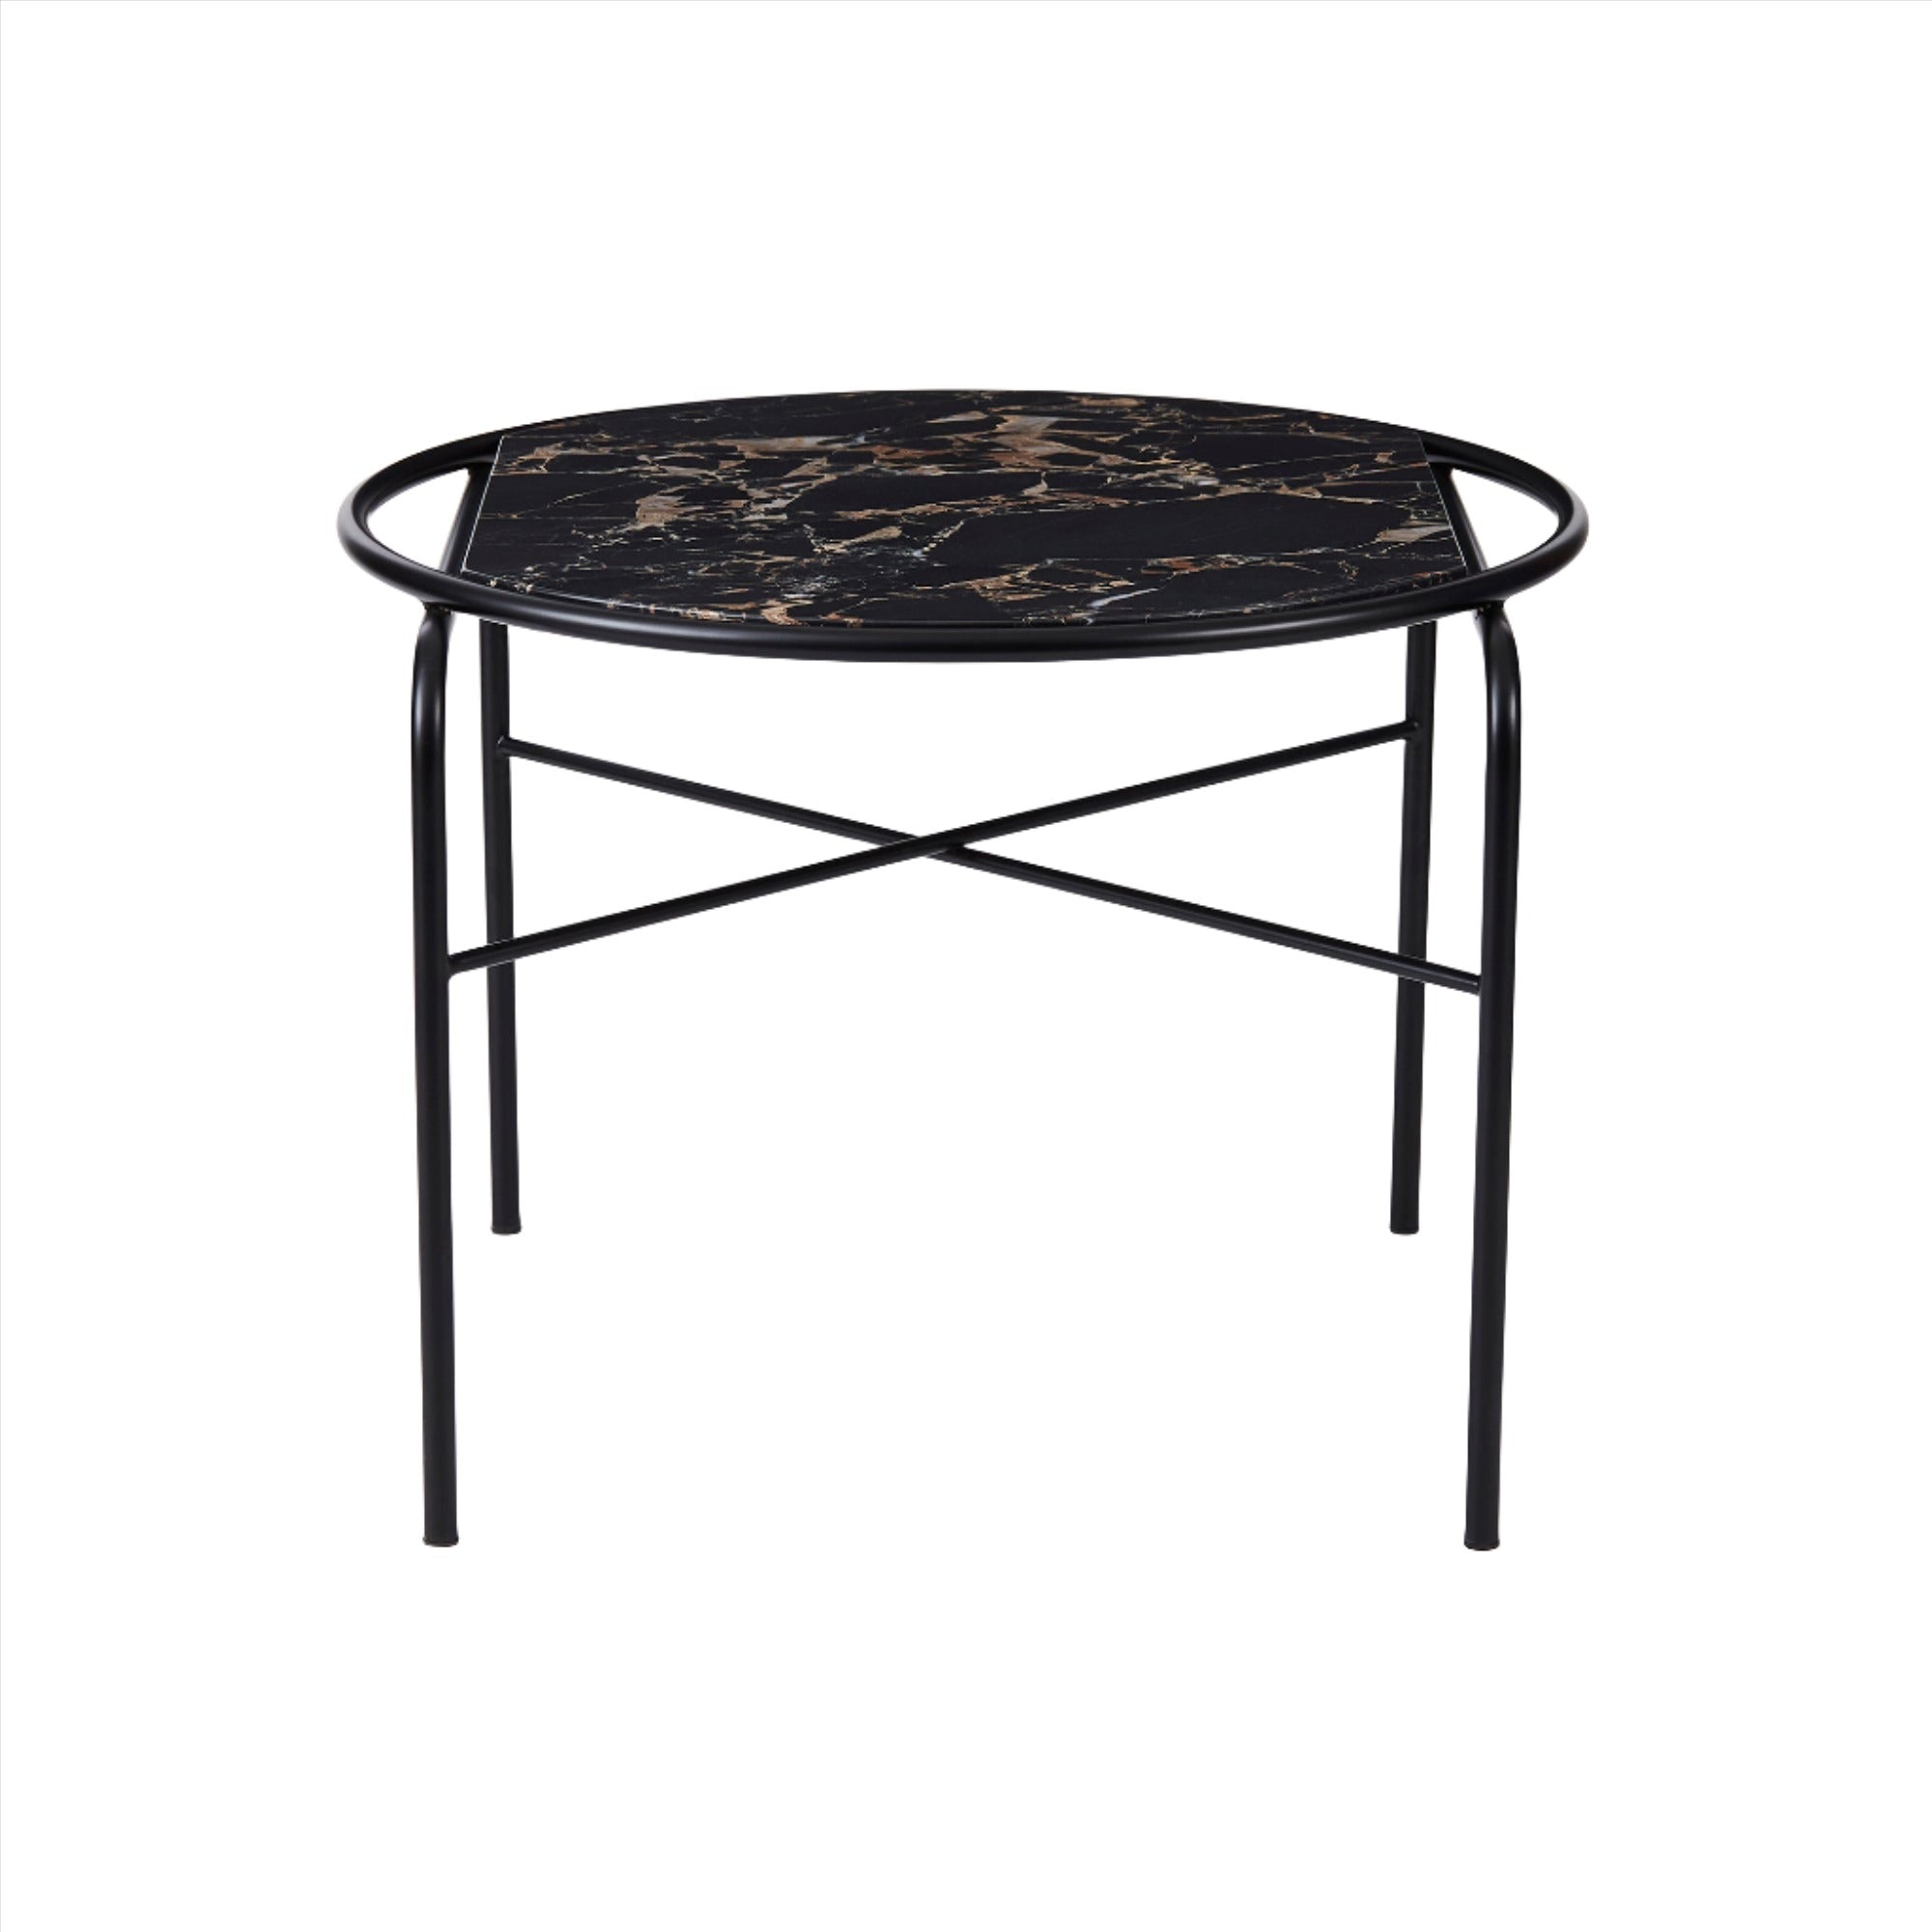 Secant Coffee Table: Round + Black + Black Gold Marble